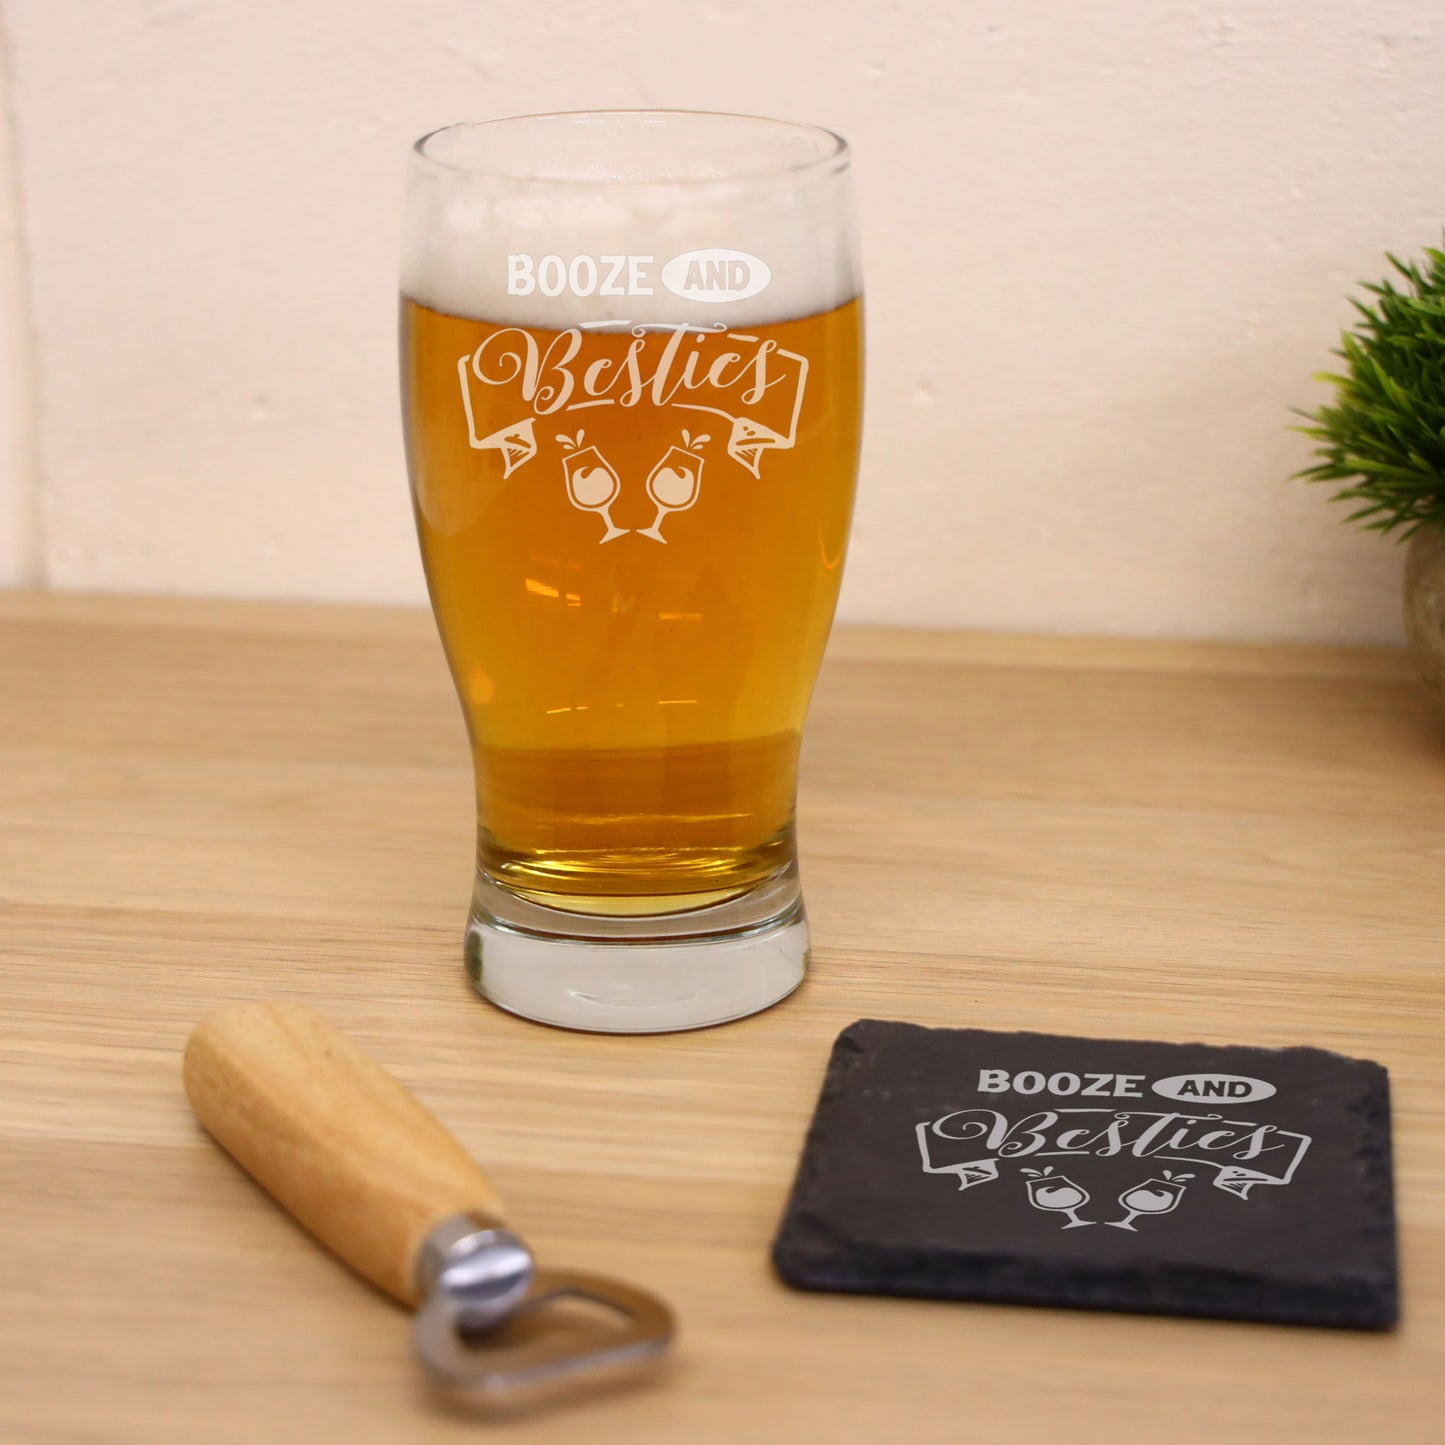 Booze and Besties Engraved Beer Pint Glass and/or Coaster Set  - Always Looking Good - Glass & Square Coaster Set  